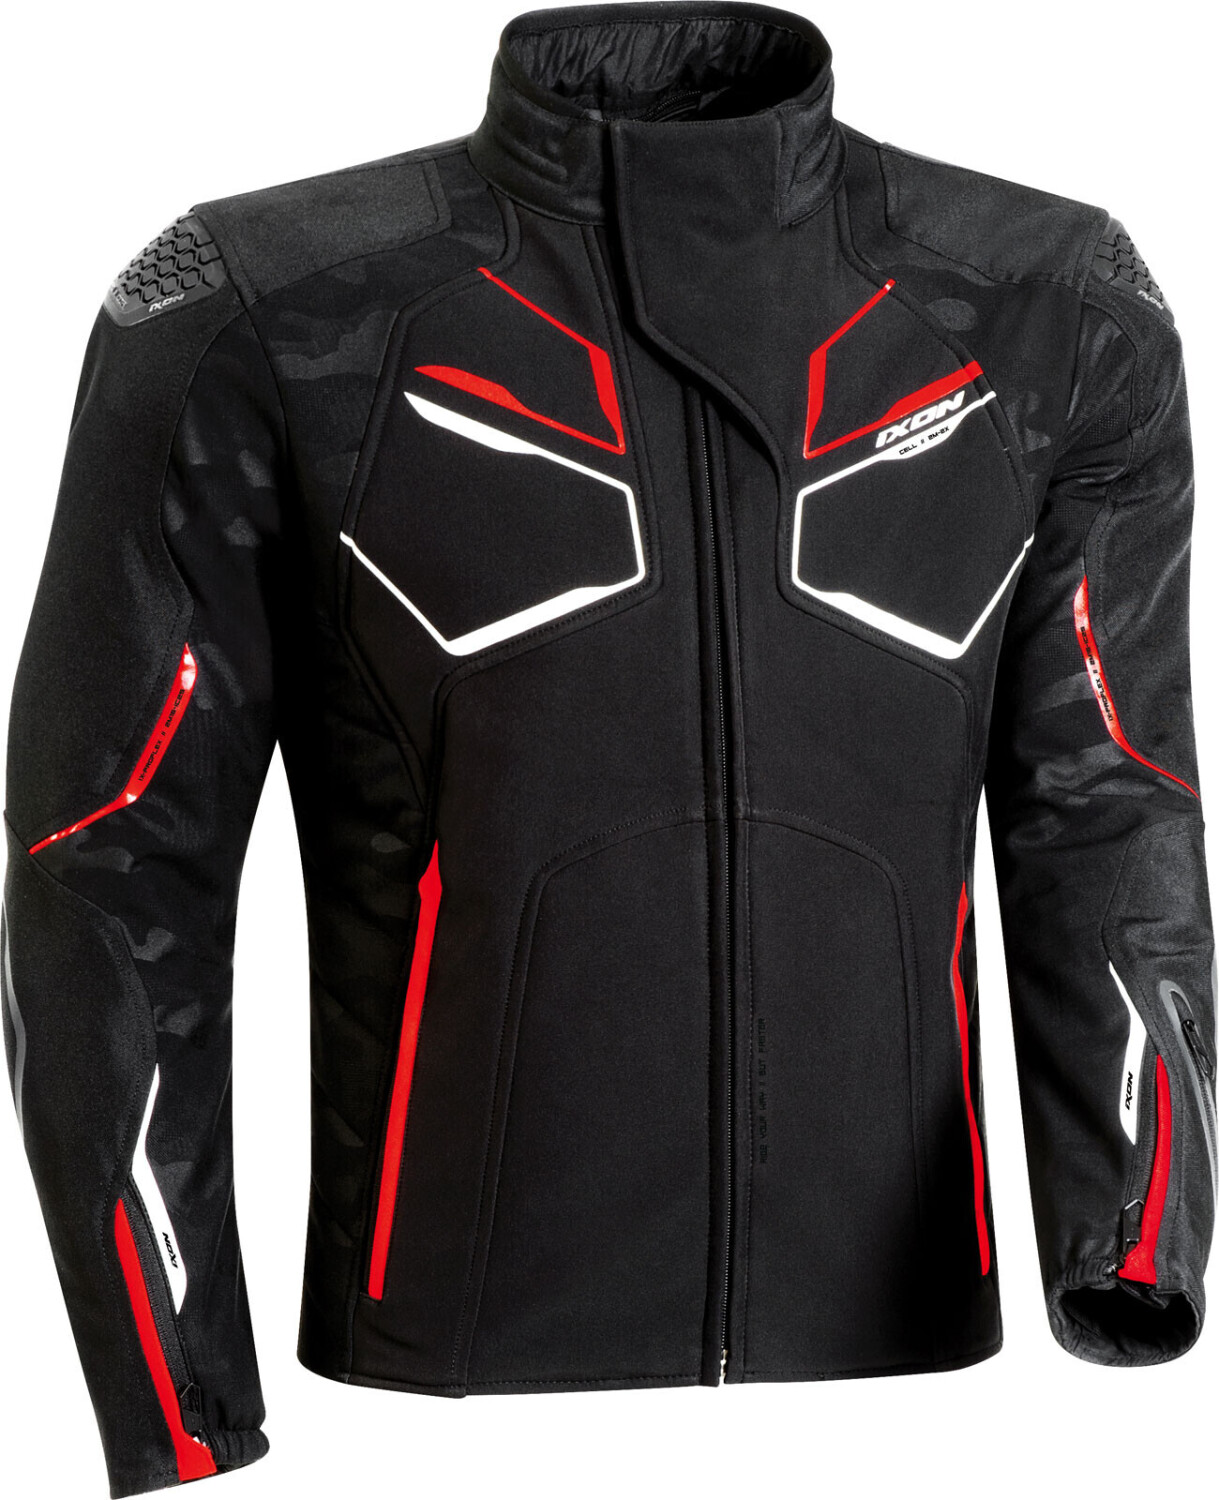 Photos - Motorcycle Clothing IXON Cell Jacket black/red/white 